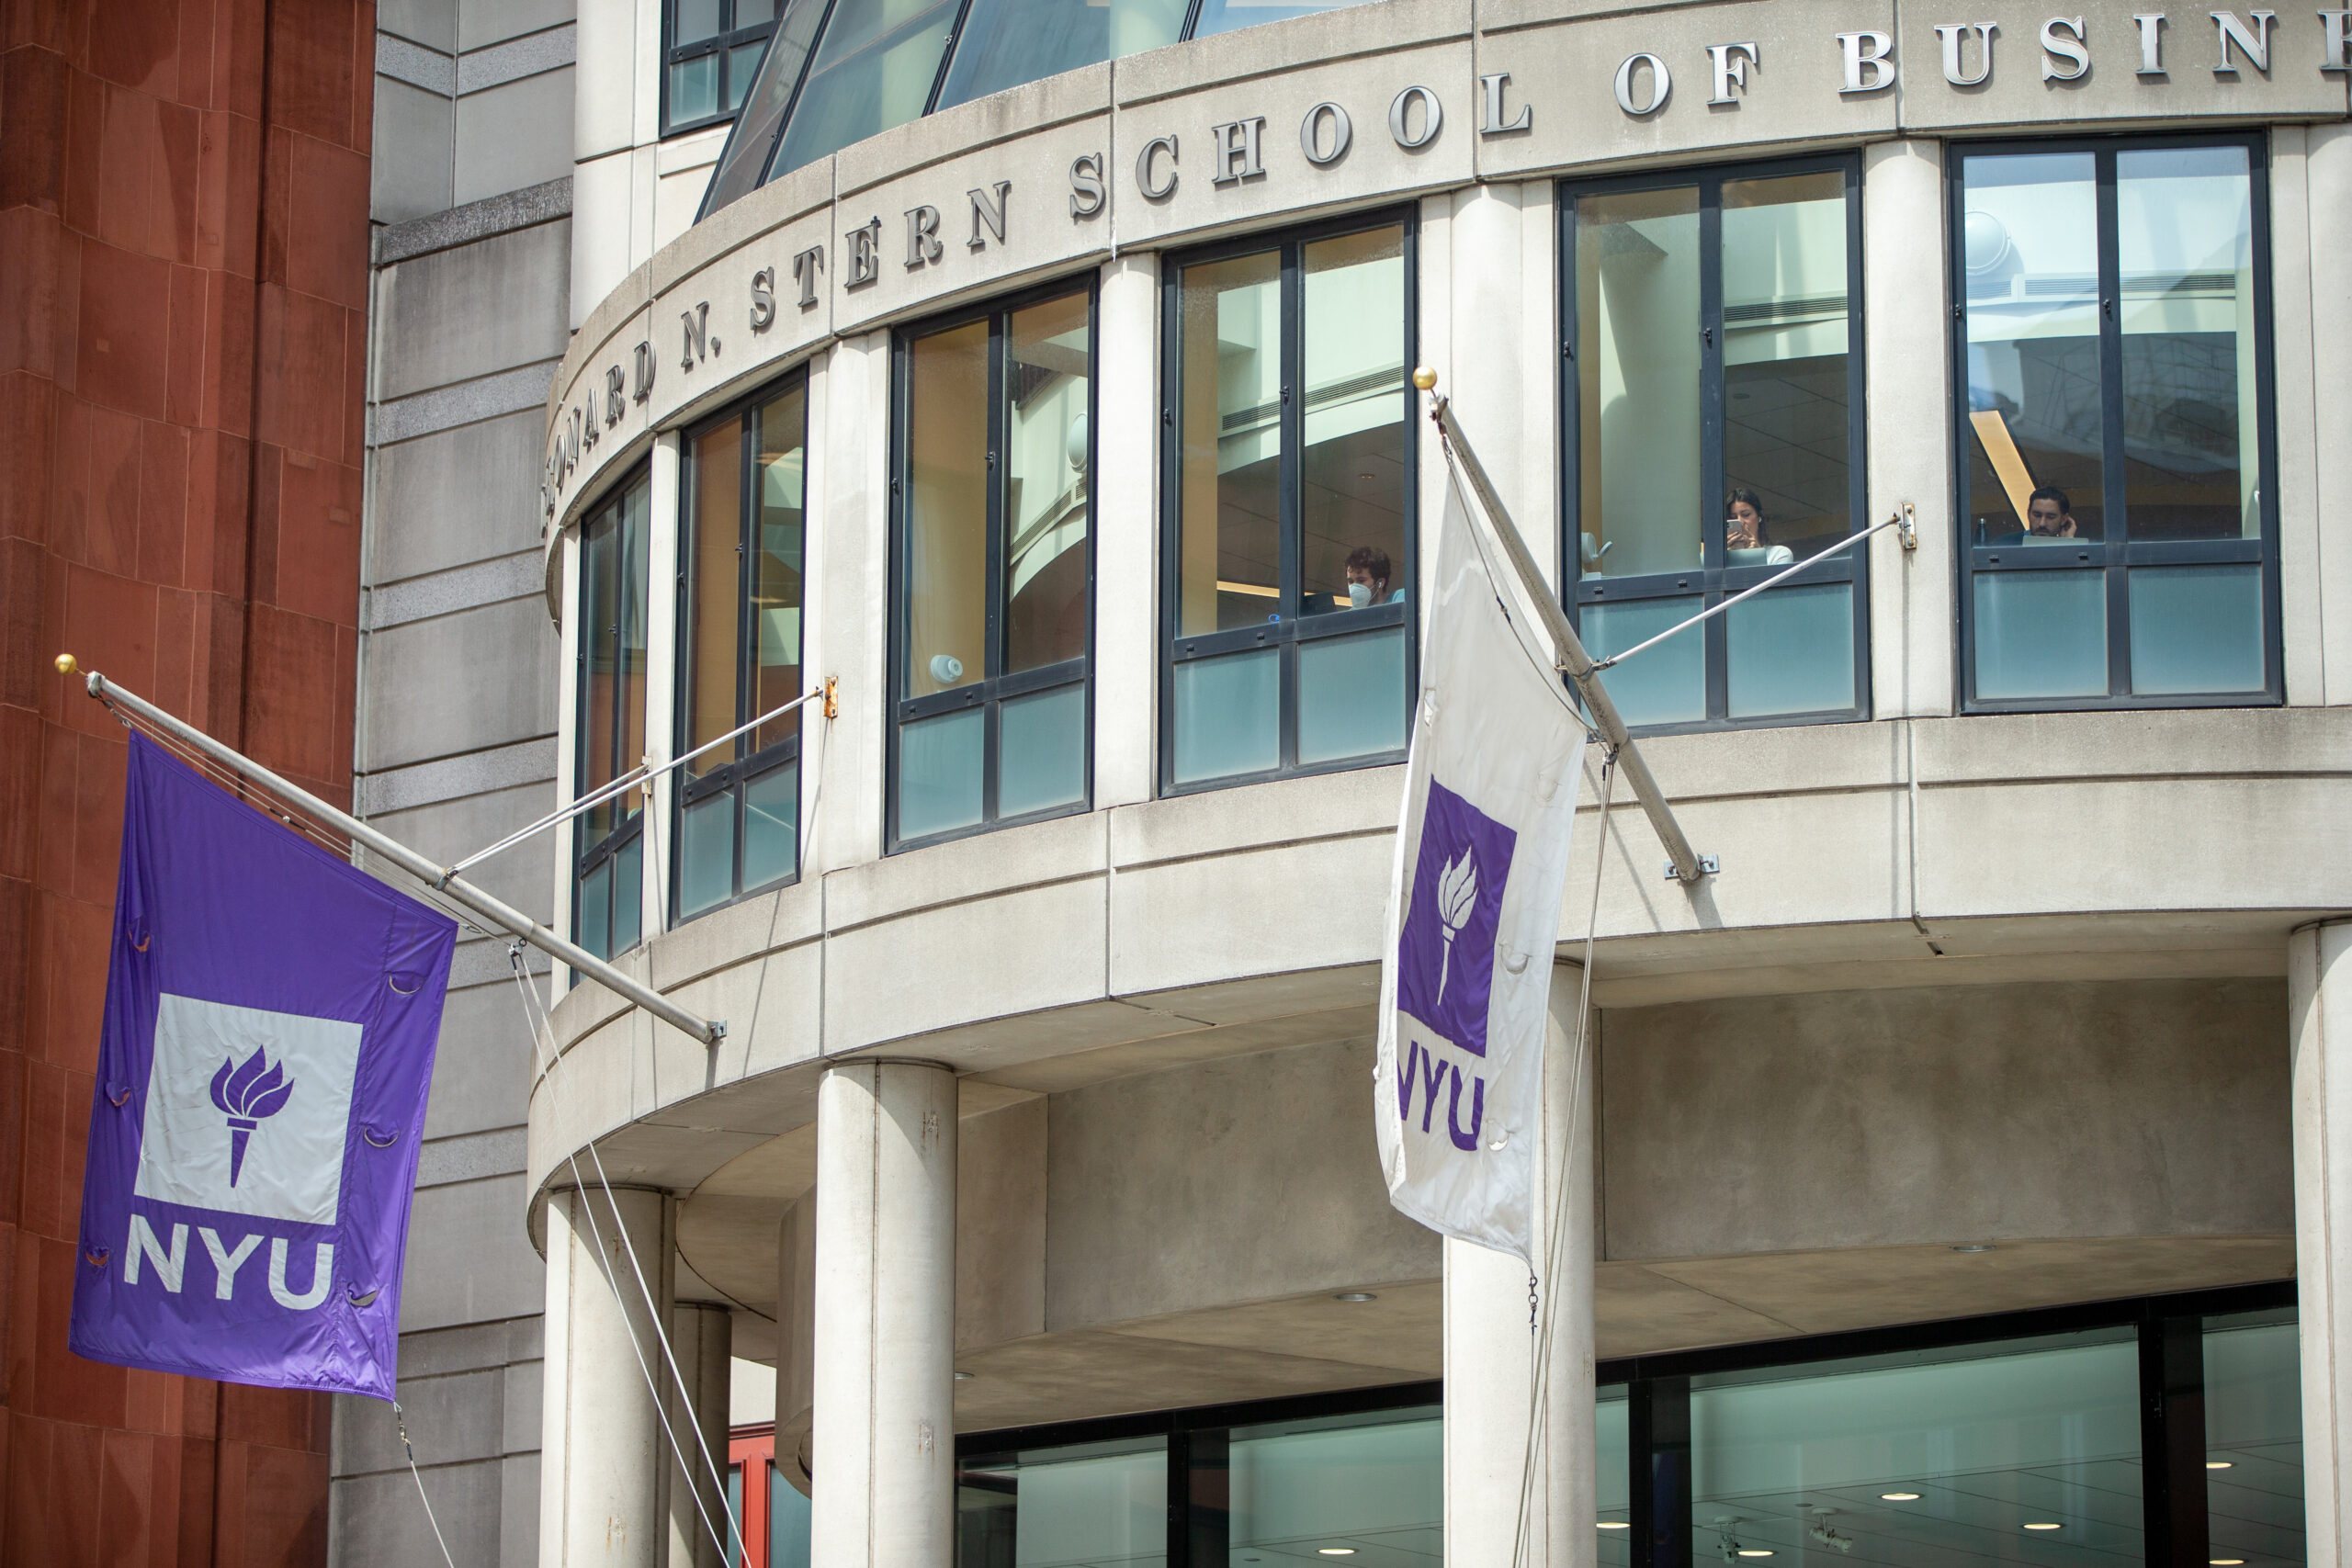 Exterior of NYU’s Stern School of Business.